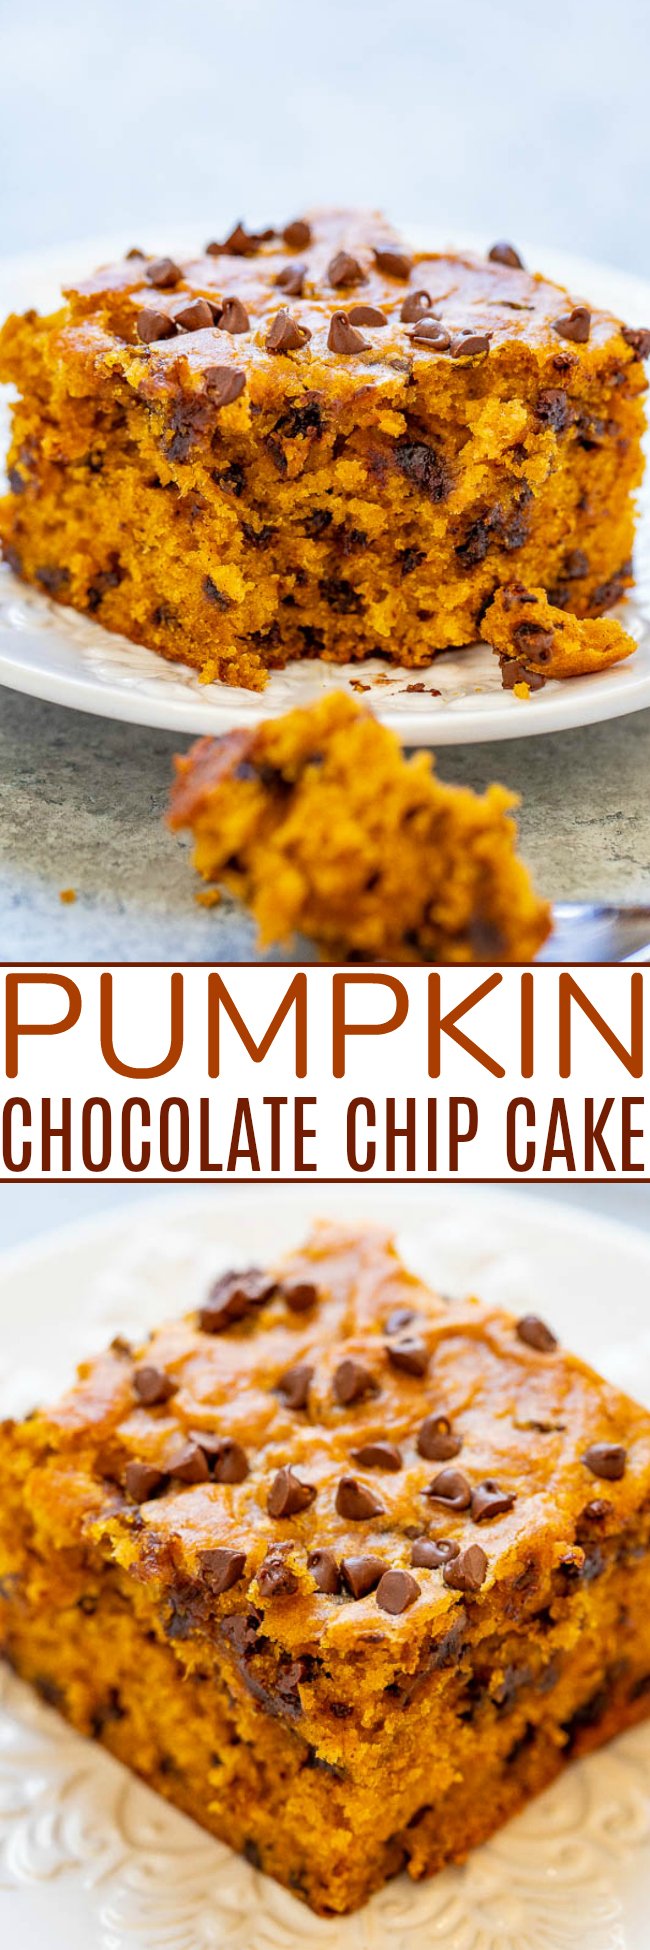 Pumpkin Chocolate Chip Cake — This soft and moist pumpkin cake is loaded with chocolate in every bite!! An EASY one-bowl fall dessert that's perfect for impromptu entertaining or anytime a pumpkin craving strikes!! 